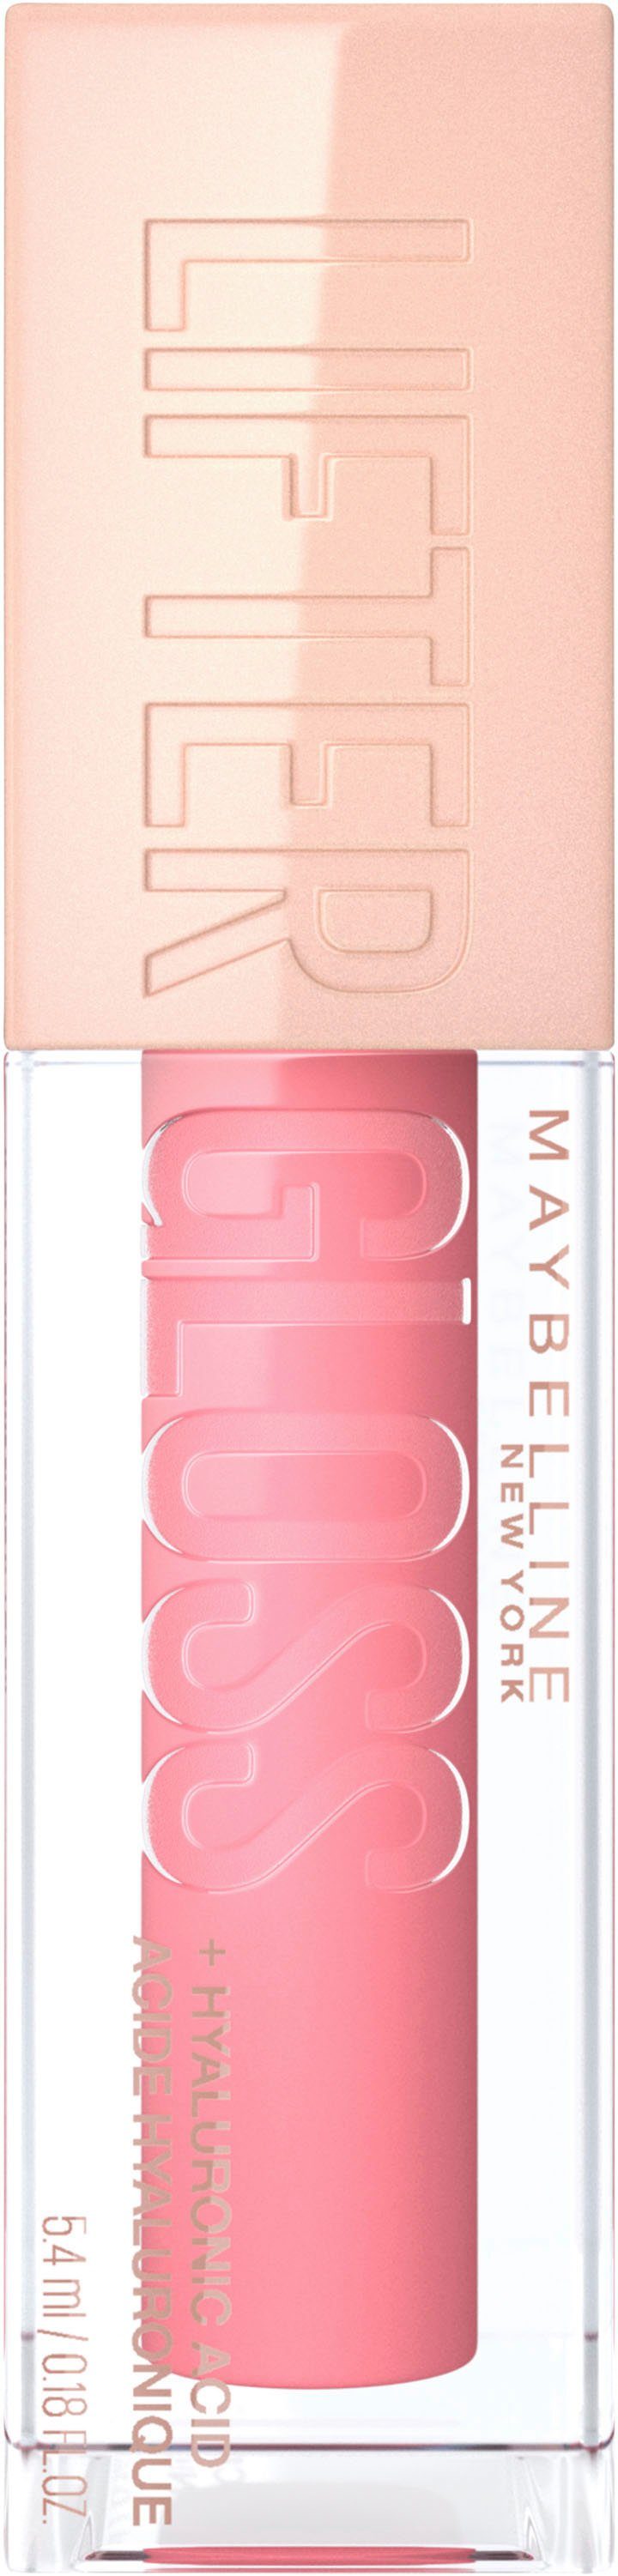 York Maybelline Lipgloss Lifter New Gloss NEW MAYBELLINE YORK